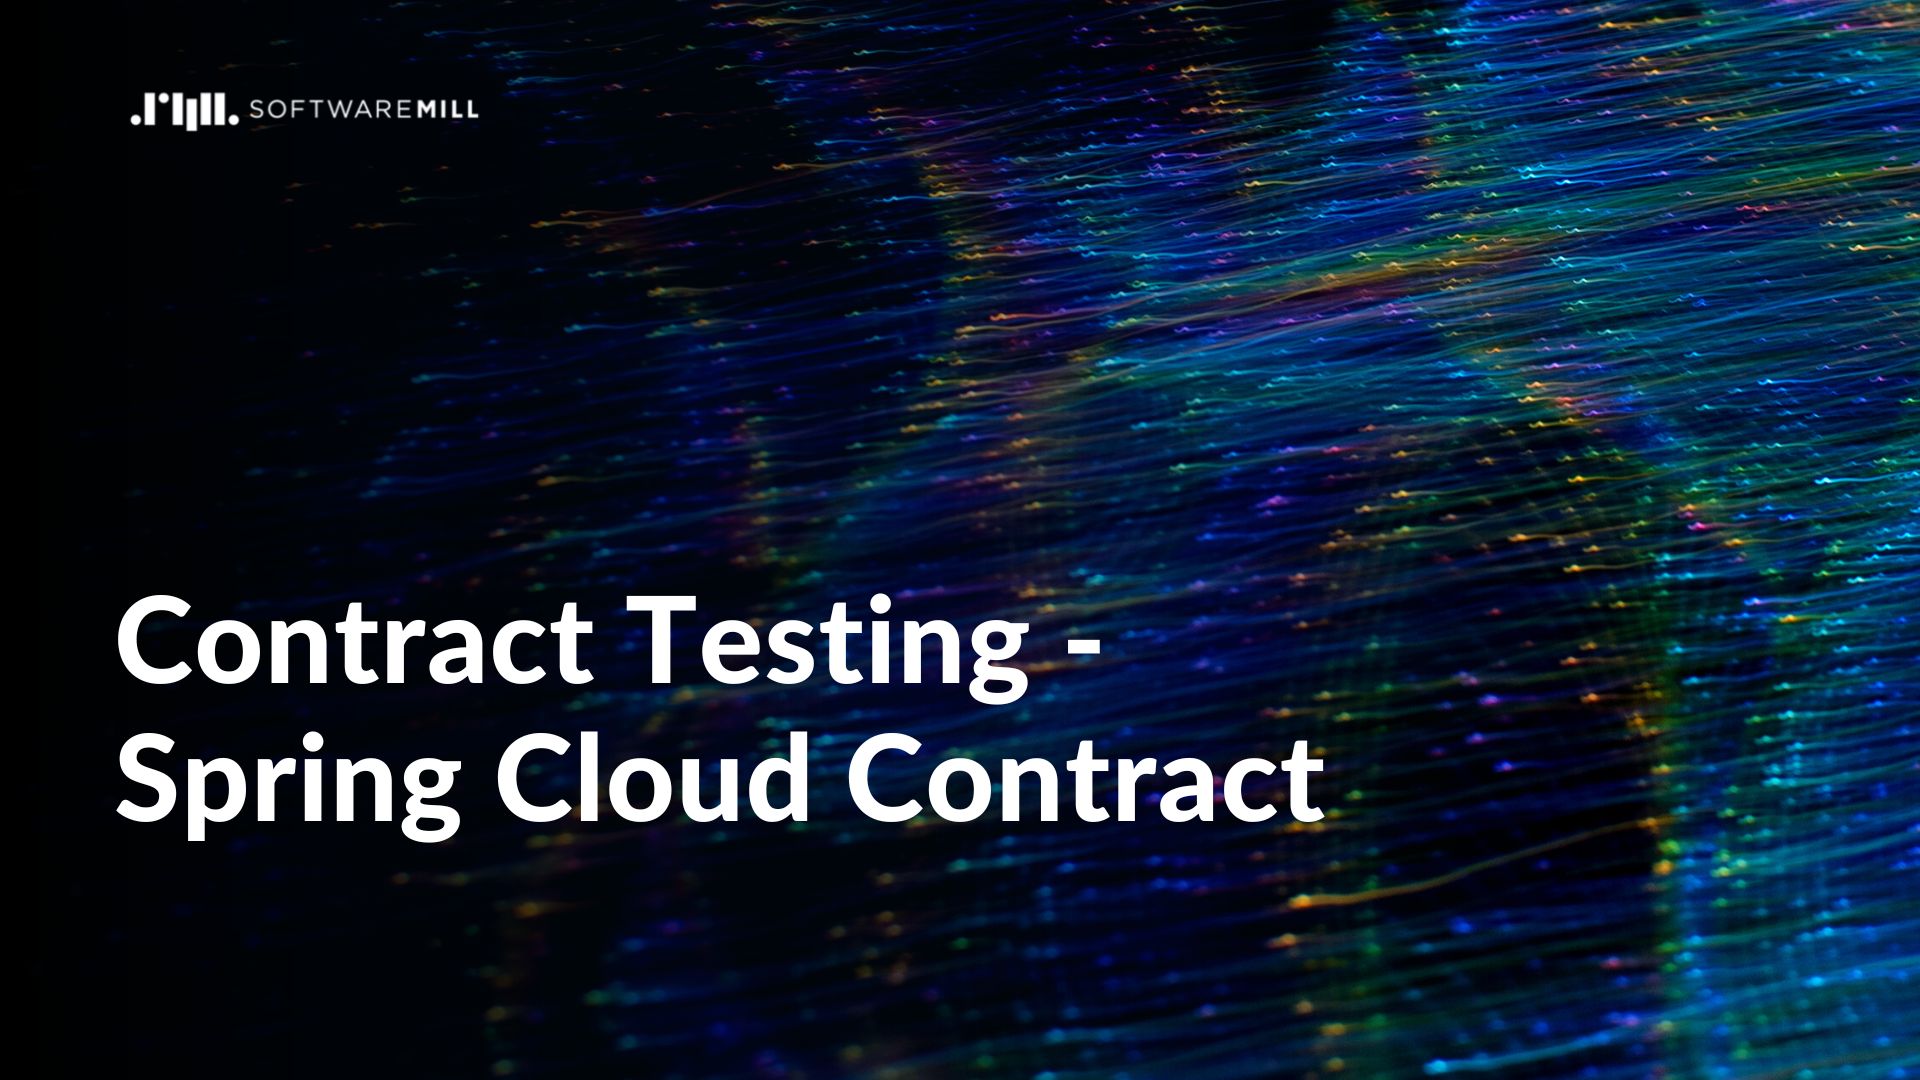 Contract Testing - Spring Cloud Contract webp image